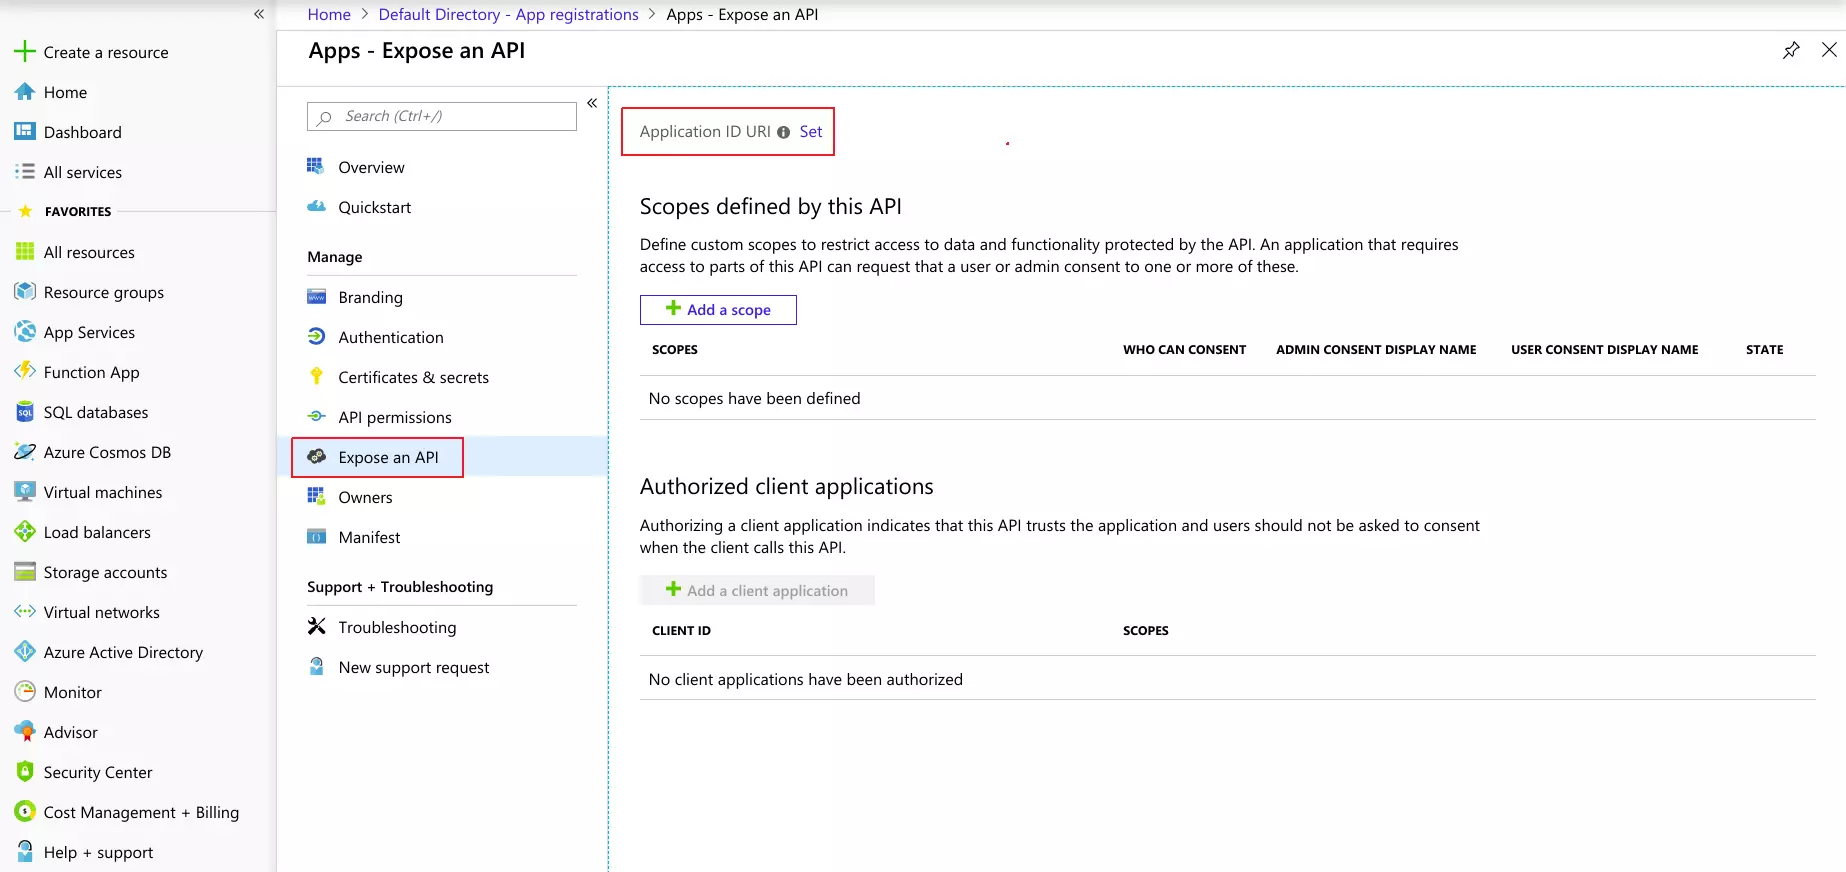 Azure AD Magento SSO - Azure Single Sign-On(SSO) Login in Magento -  Expose an API